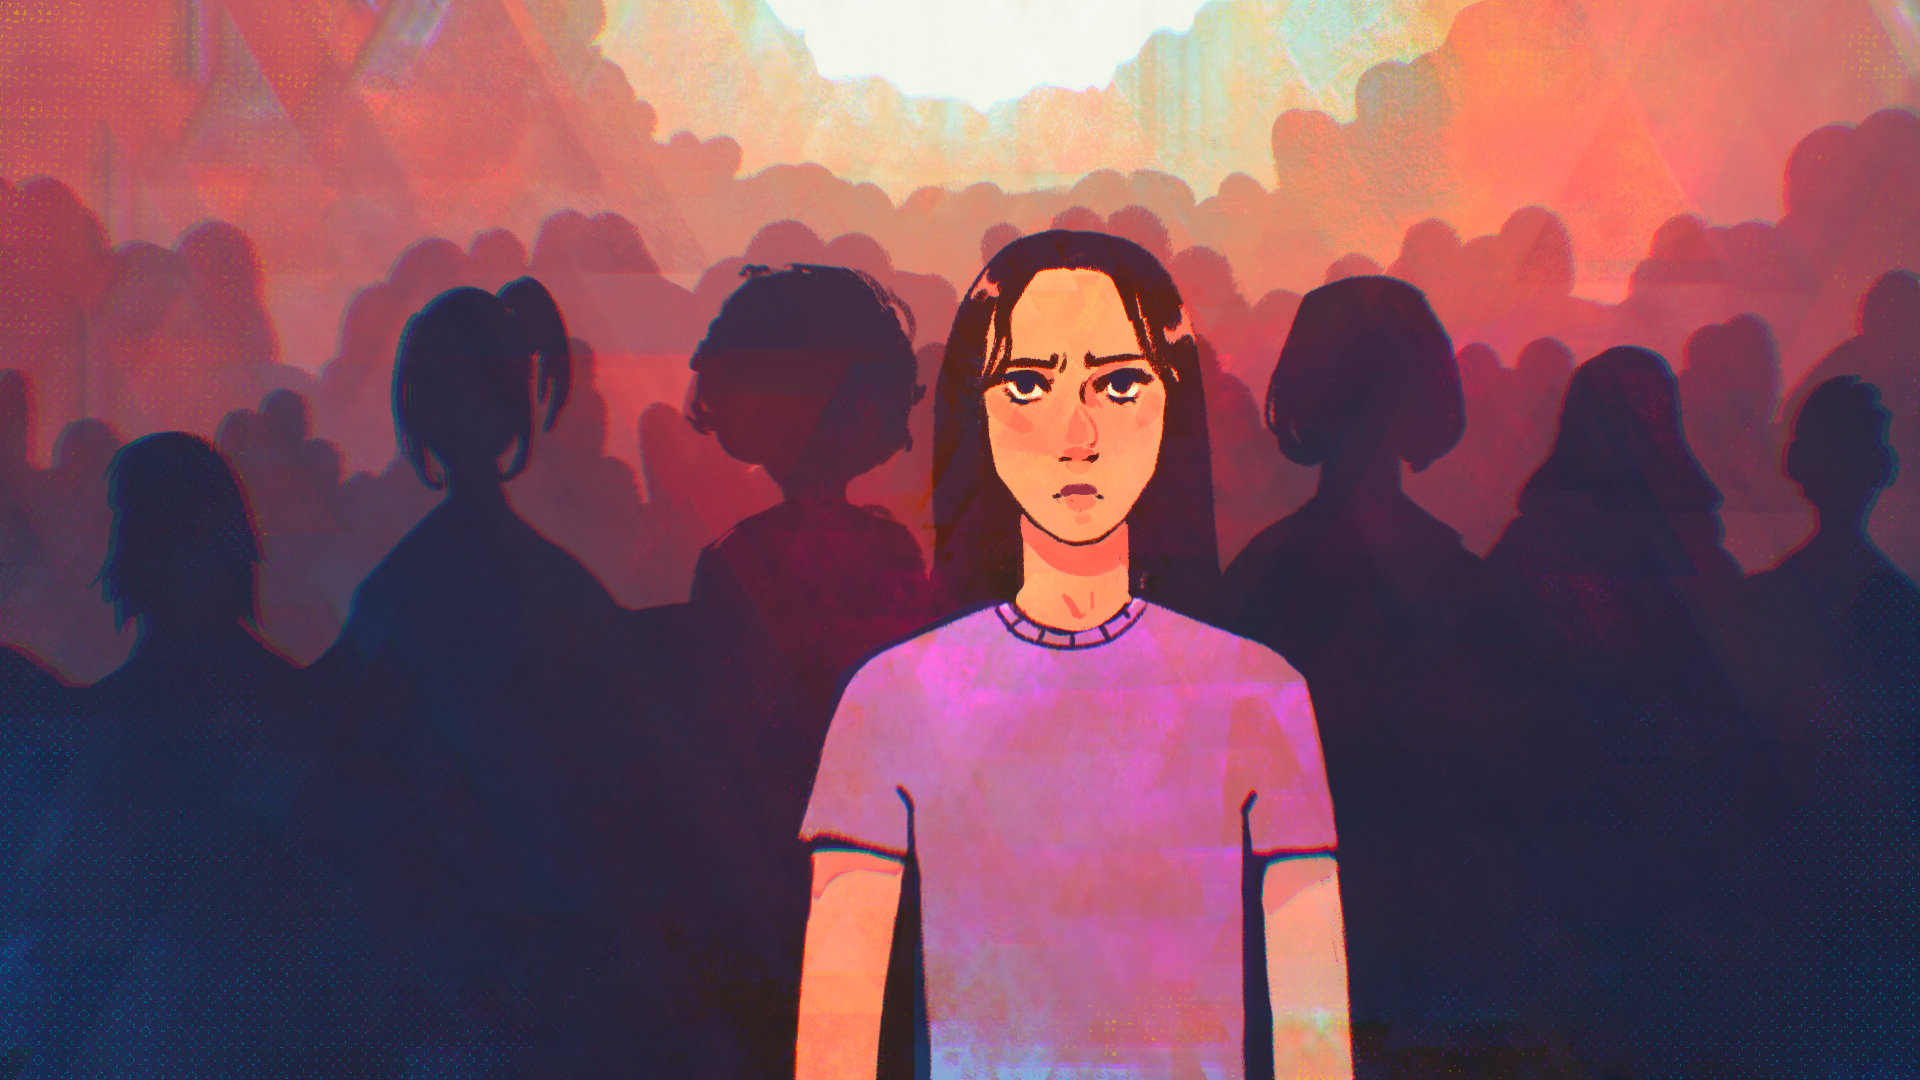 Illustration of a girl in a pink shirt standing alone and looking scared